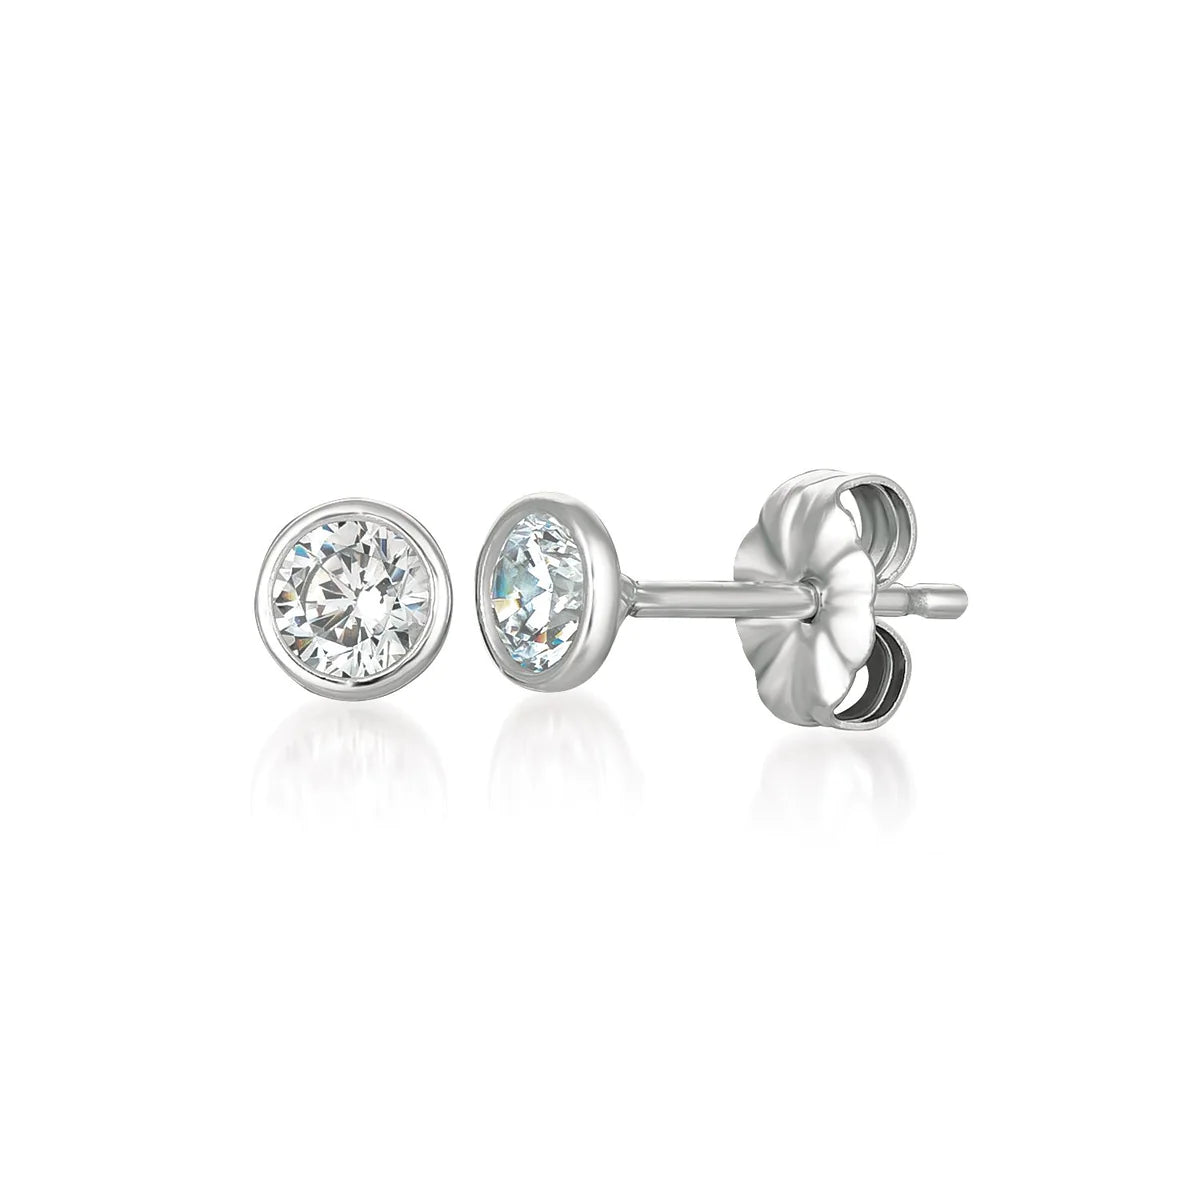 Solitaire Bezel Set Earrings Finished in Pure Platinum- 4.0 cttw